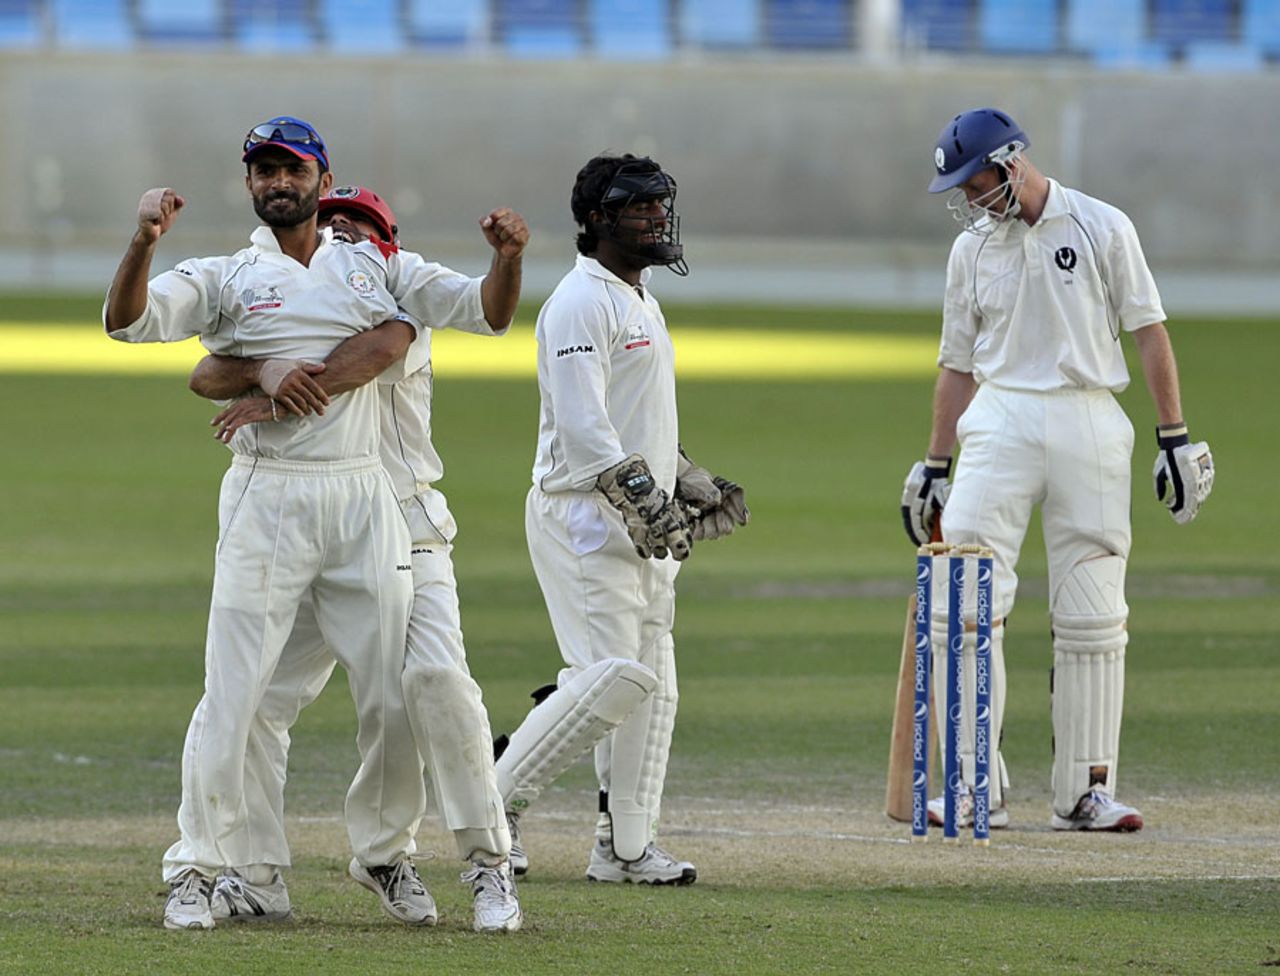 Narwoz Mangal celebrates his catch to remove Gregor Maiden, Afghanistan v Scotland, ICC Intercontinental Cup, Dubai, December 3, 2010